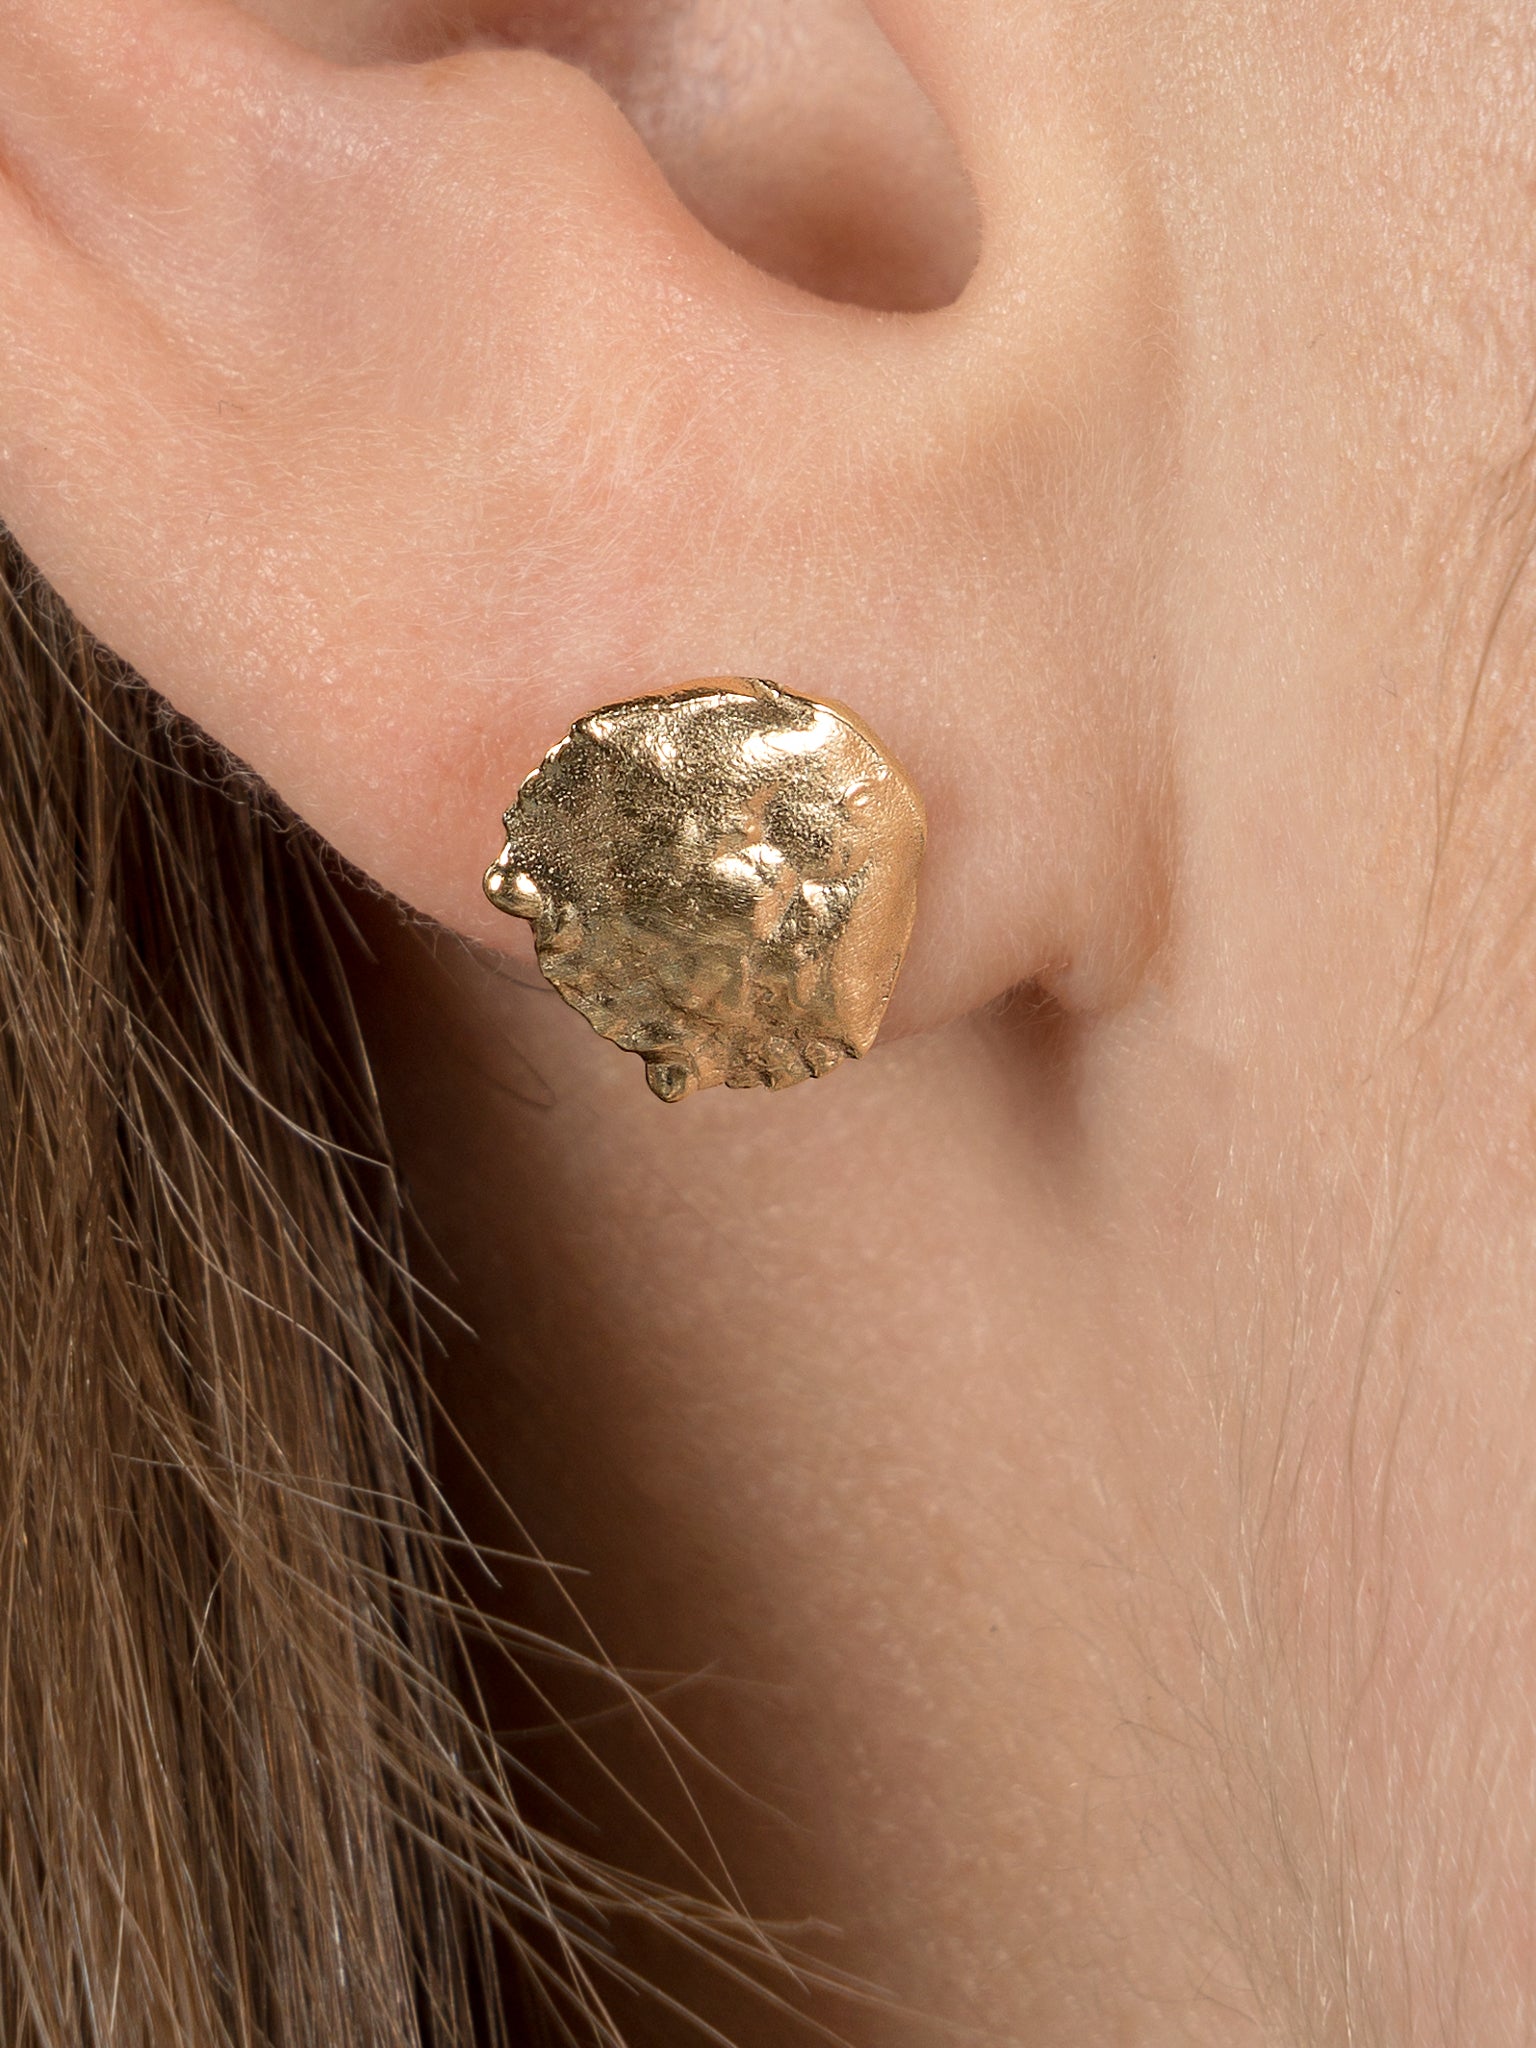 Gold crab shell stud being worn on an ear. Close up shot of a single earring cast from crab shell.